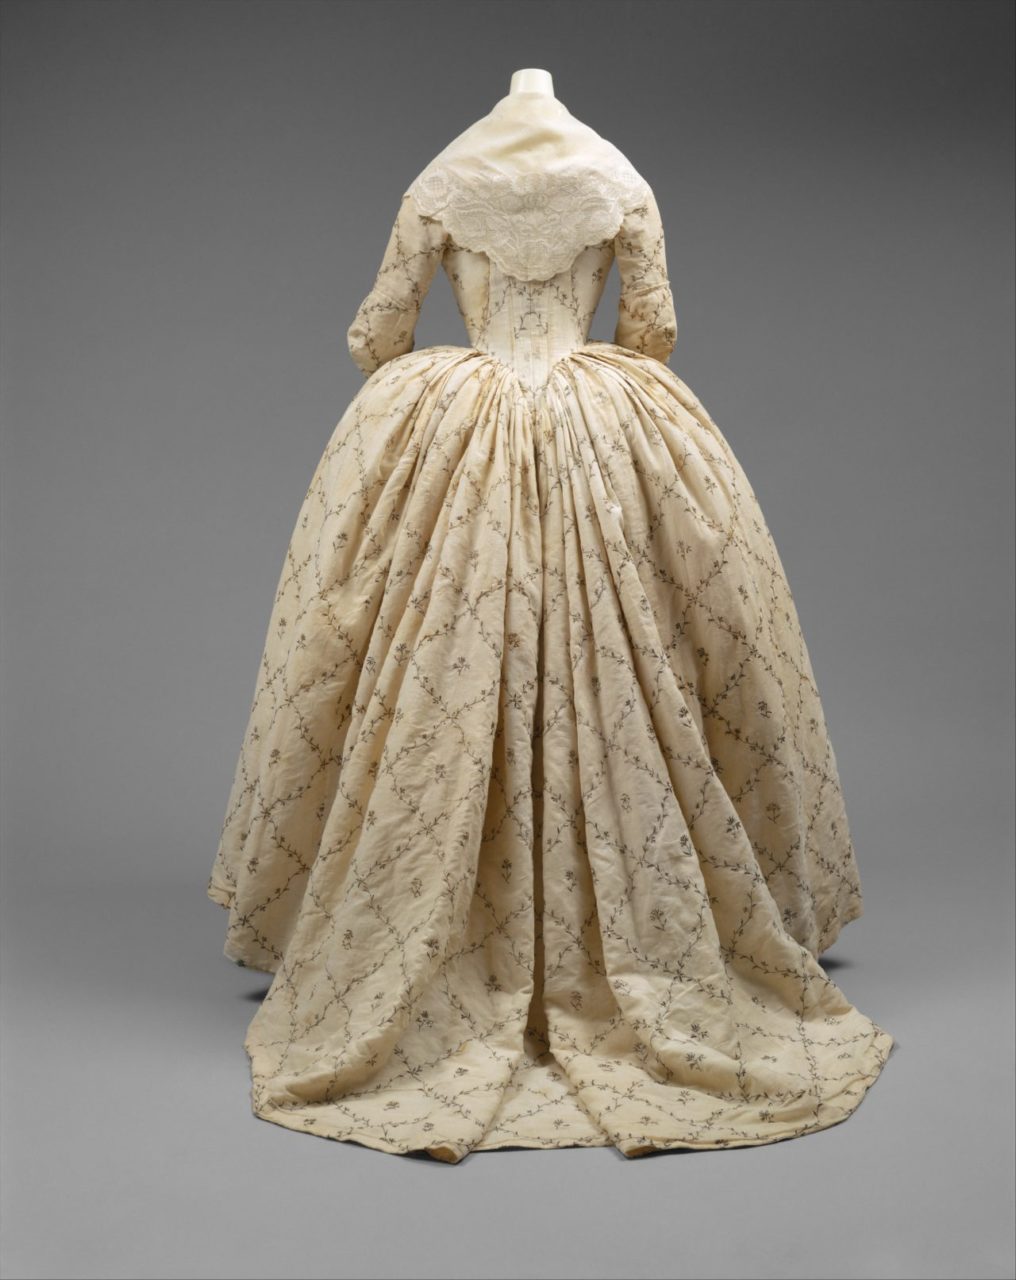 Robe à l’anglaise, rear view